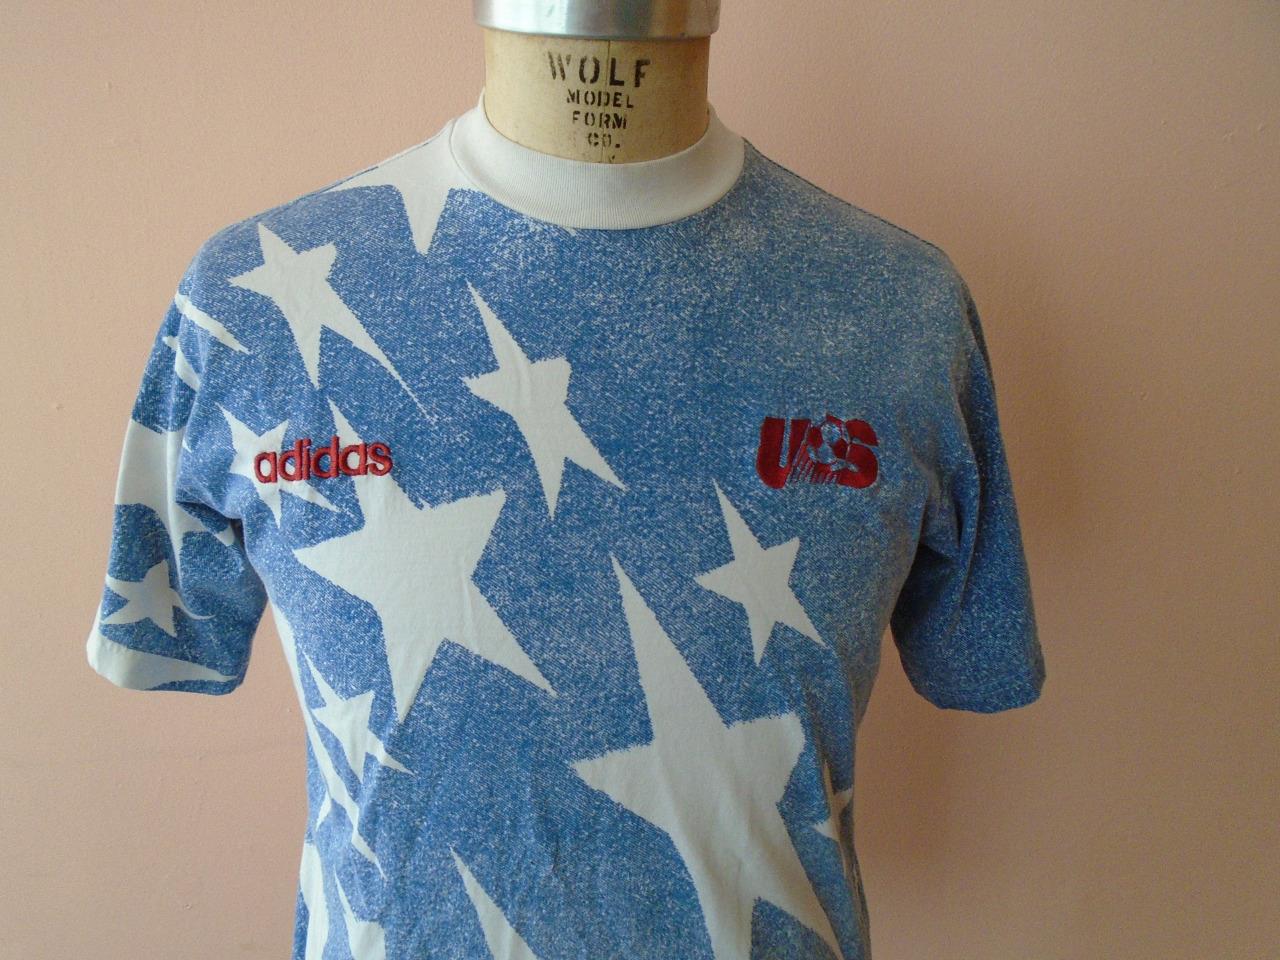 VTG Adidas 1994 USA Men's Soccer Team Jersey/Shirt L World Cup Star Graphic - Picture 1 of 1